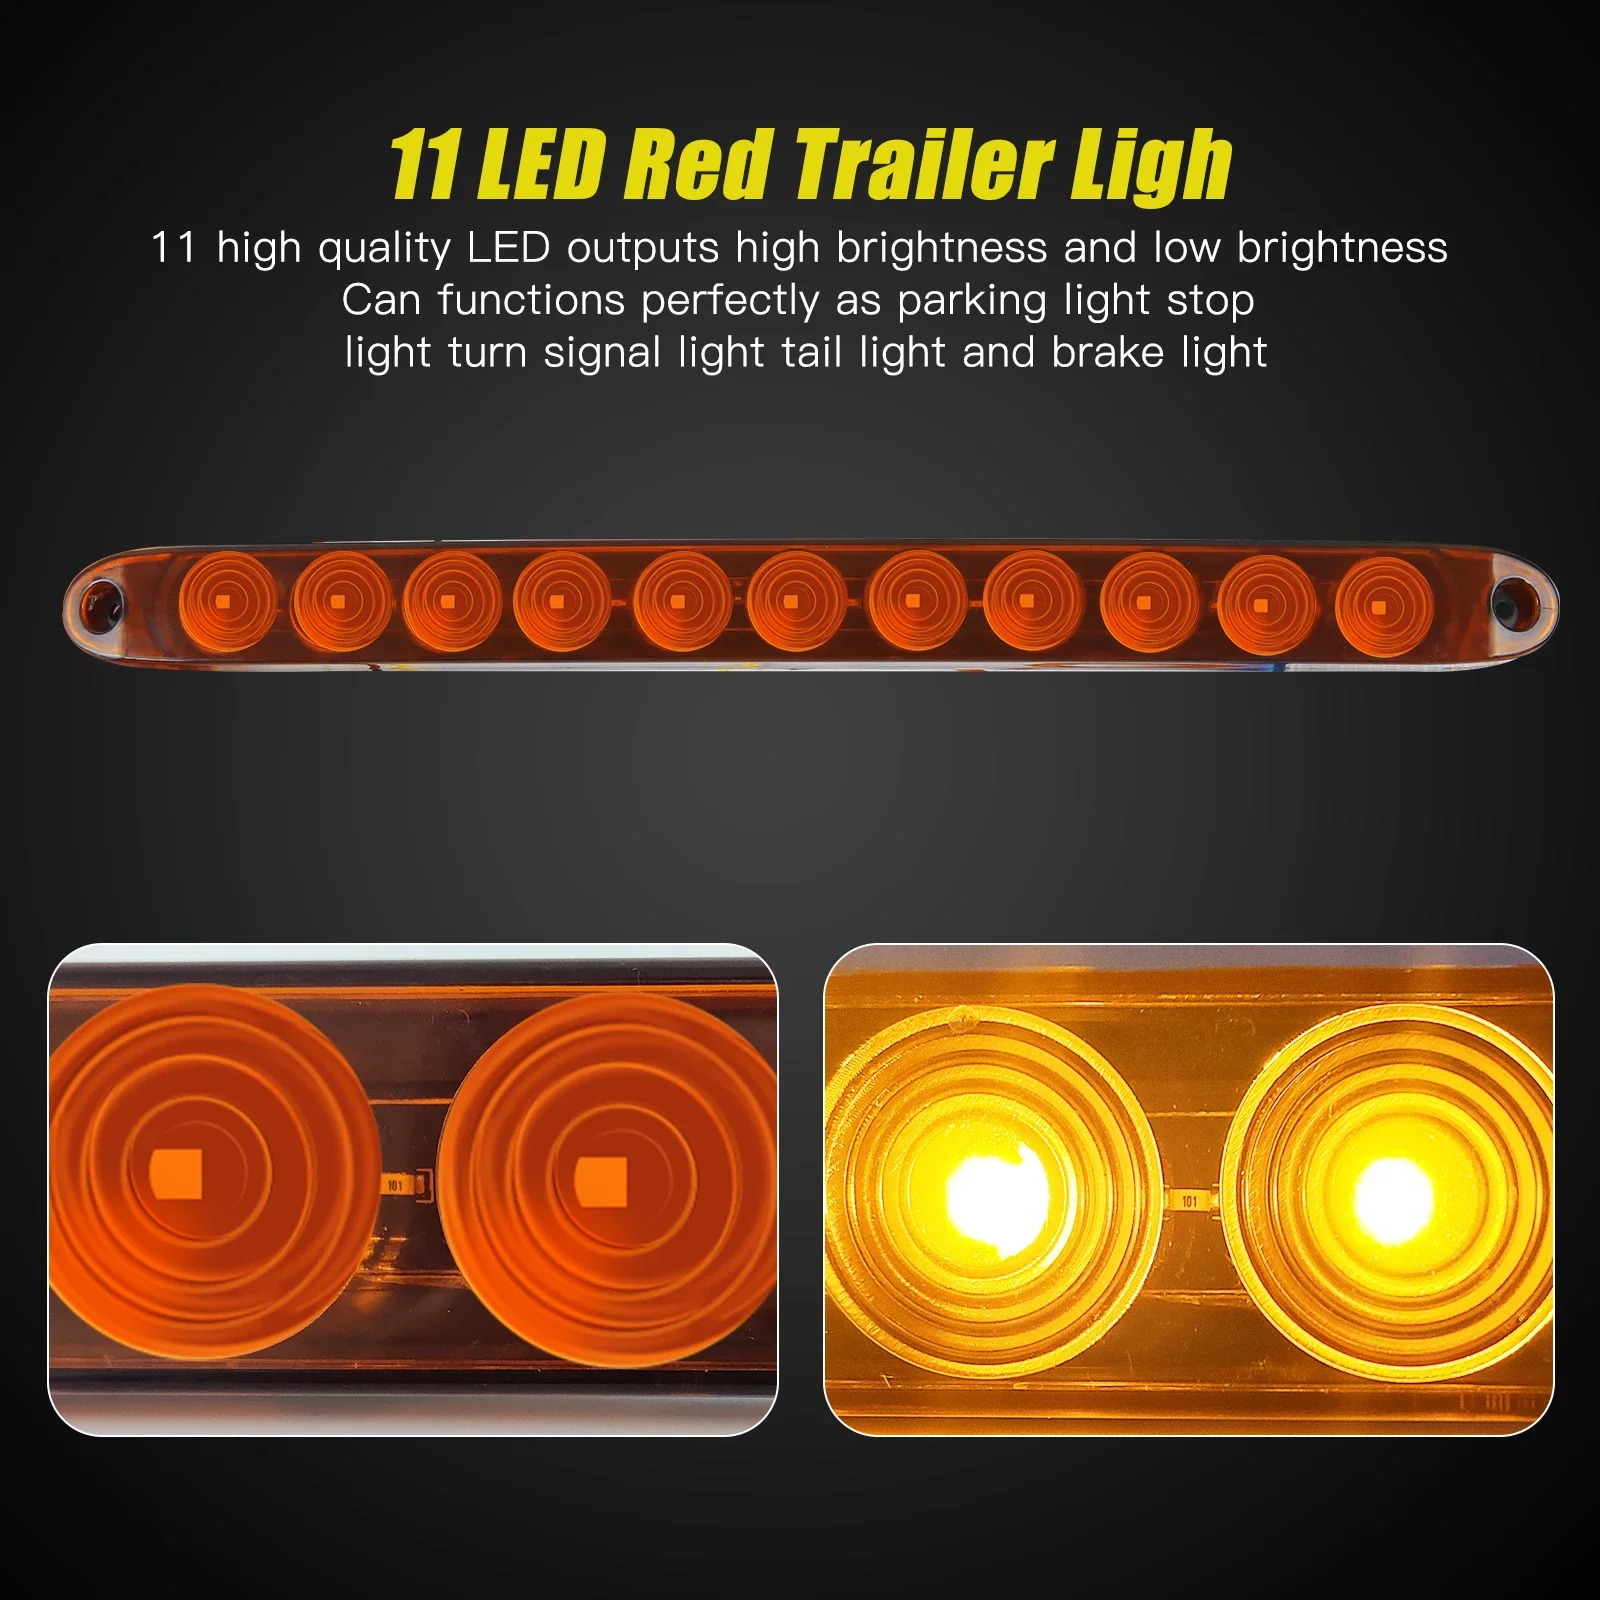 2PCS Waterproof 16-Inch 11-LED Truck Tail Trailer Light with Brake Stop,  Park, High/Low Brightness, Marker Bar - 12V Amber Red